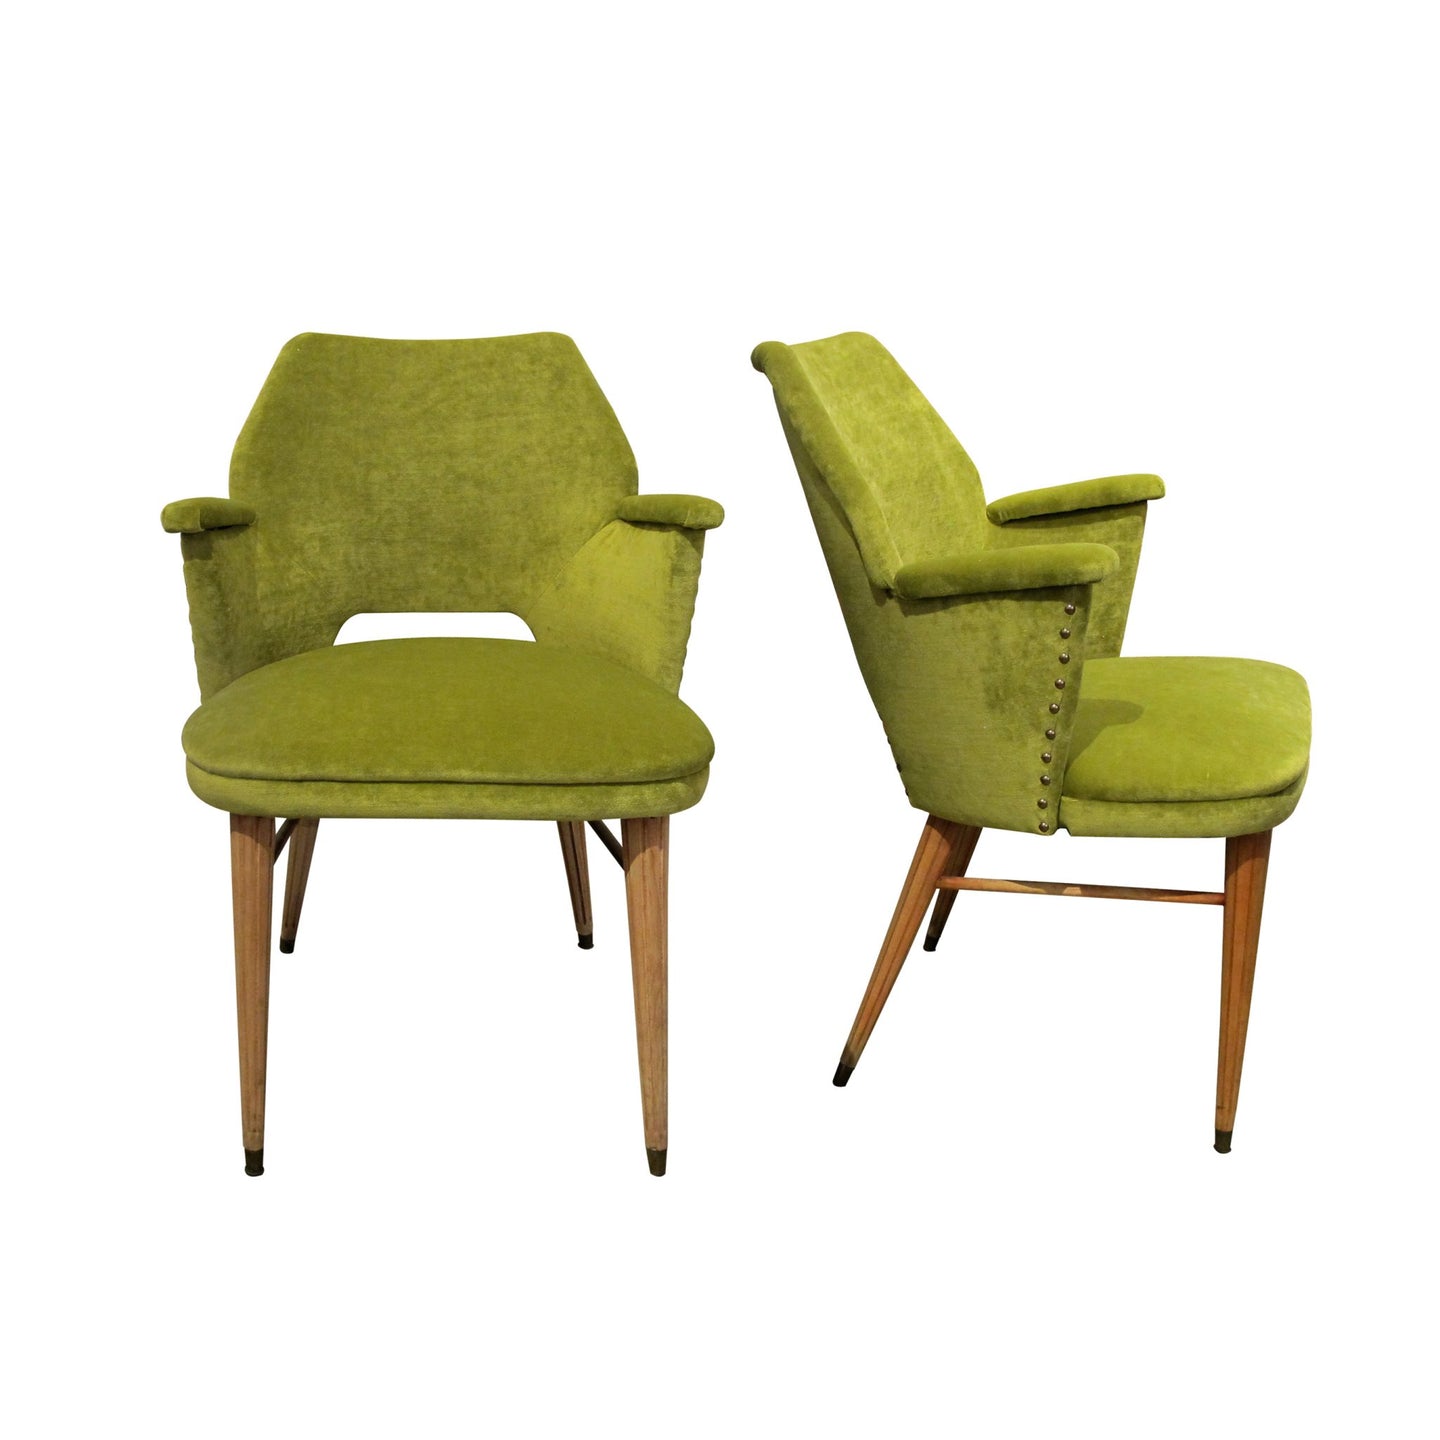 Pair of 1950s Swedish Occasional Chairs